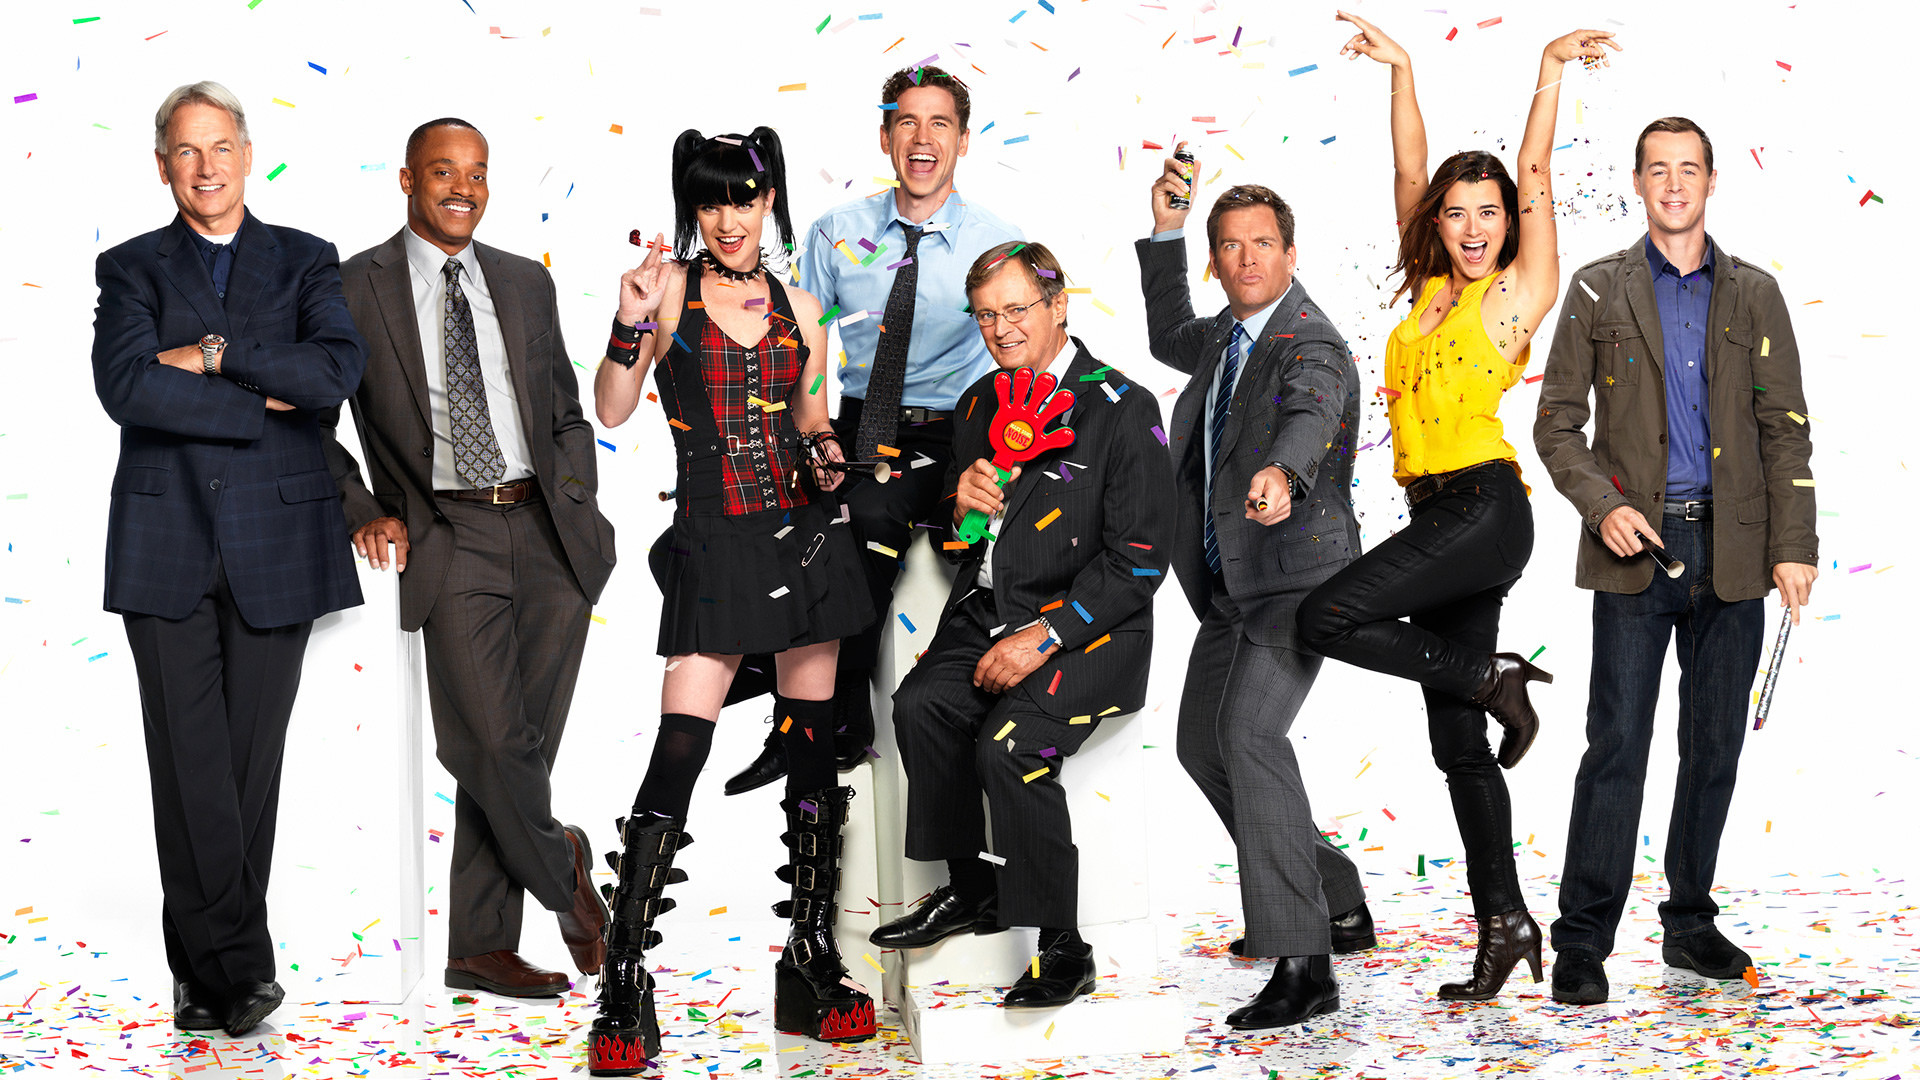 1920x1080 Best Ncis Wallpapers: Ncis Wallpapers 3200142